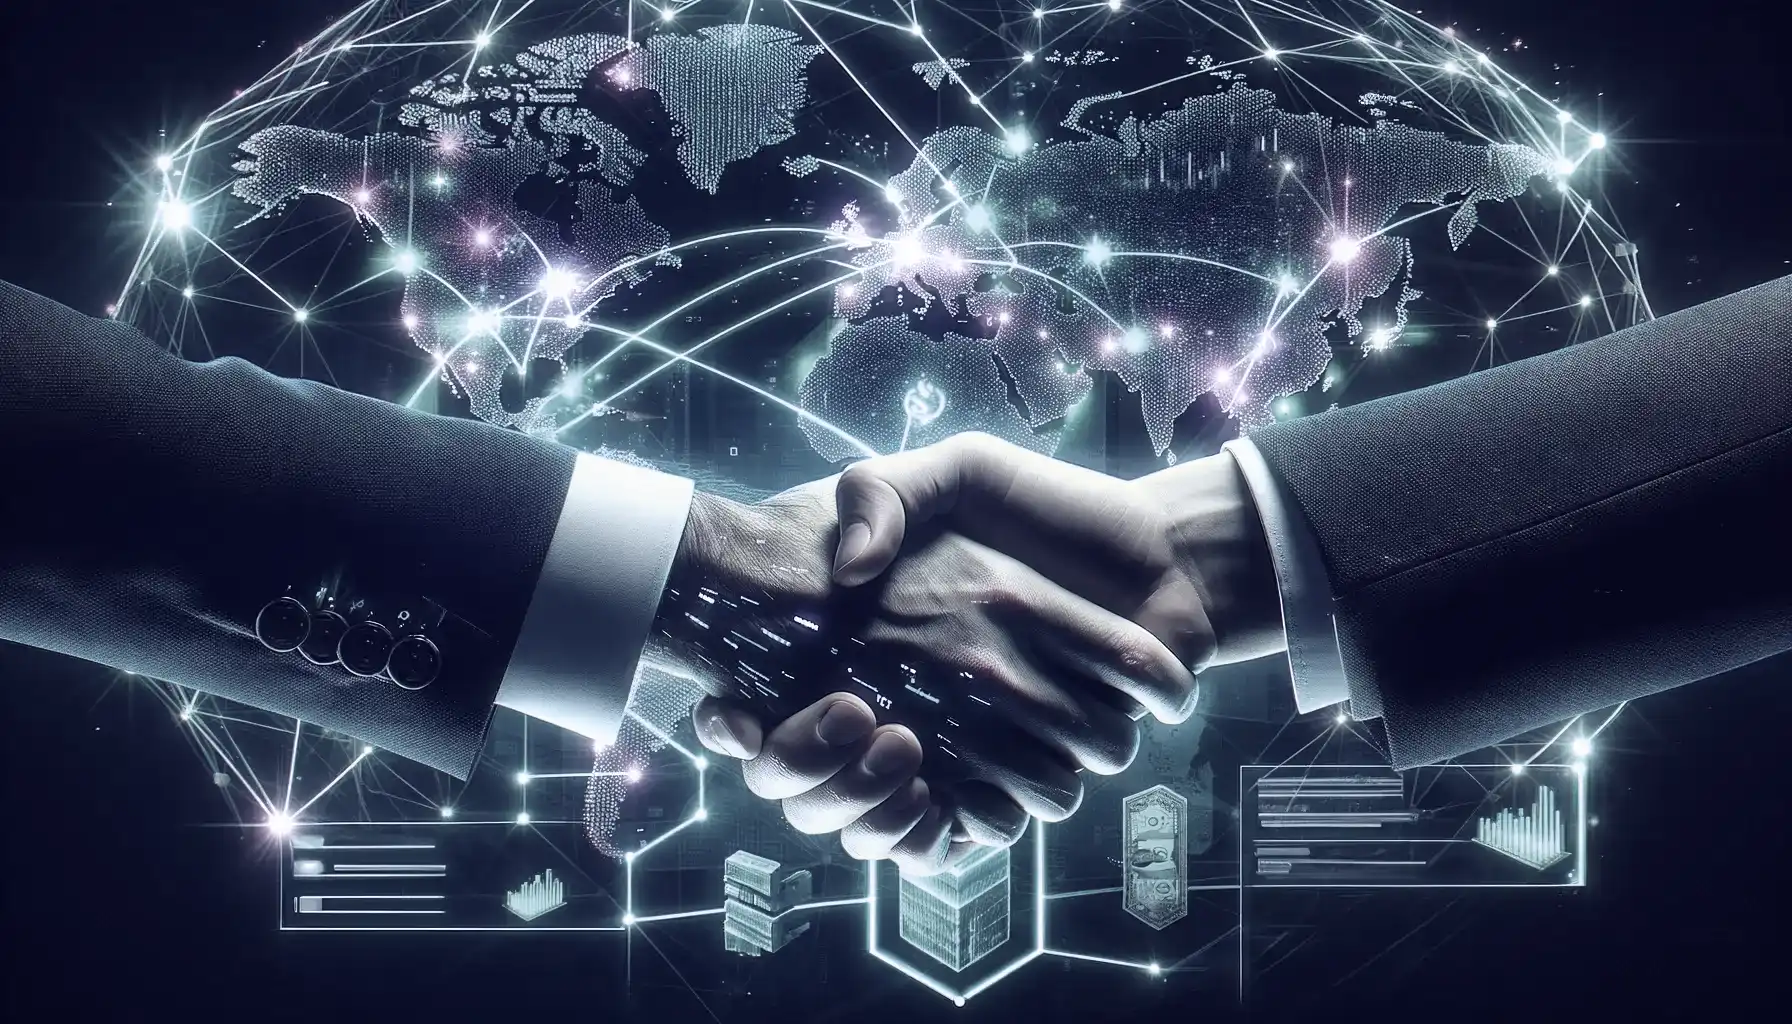 This image illustrates the role of a company's blockchain services in facilitating strategic business partnerships. The central focus is on two hands shaking against a backdrop of a world map, symbolizing global collaboration and deal-making. This handshake represents the formation of strategic tie-ups. Behind this gesture, the world map features visualizations of cross-border payments, which are interconnected by a network of neon green and purple lights. These lights represent the blockchain network, signifying its role in enabling efficient and smart outcomes in international business transactions. The overall design is sleek, modern, and digital, emphasizing the transformative impact of blockchain technology in fostering global business collaborations and partnerships.